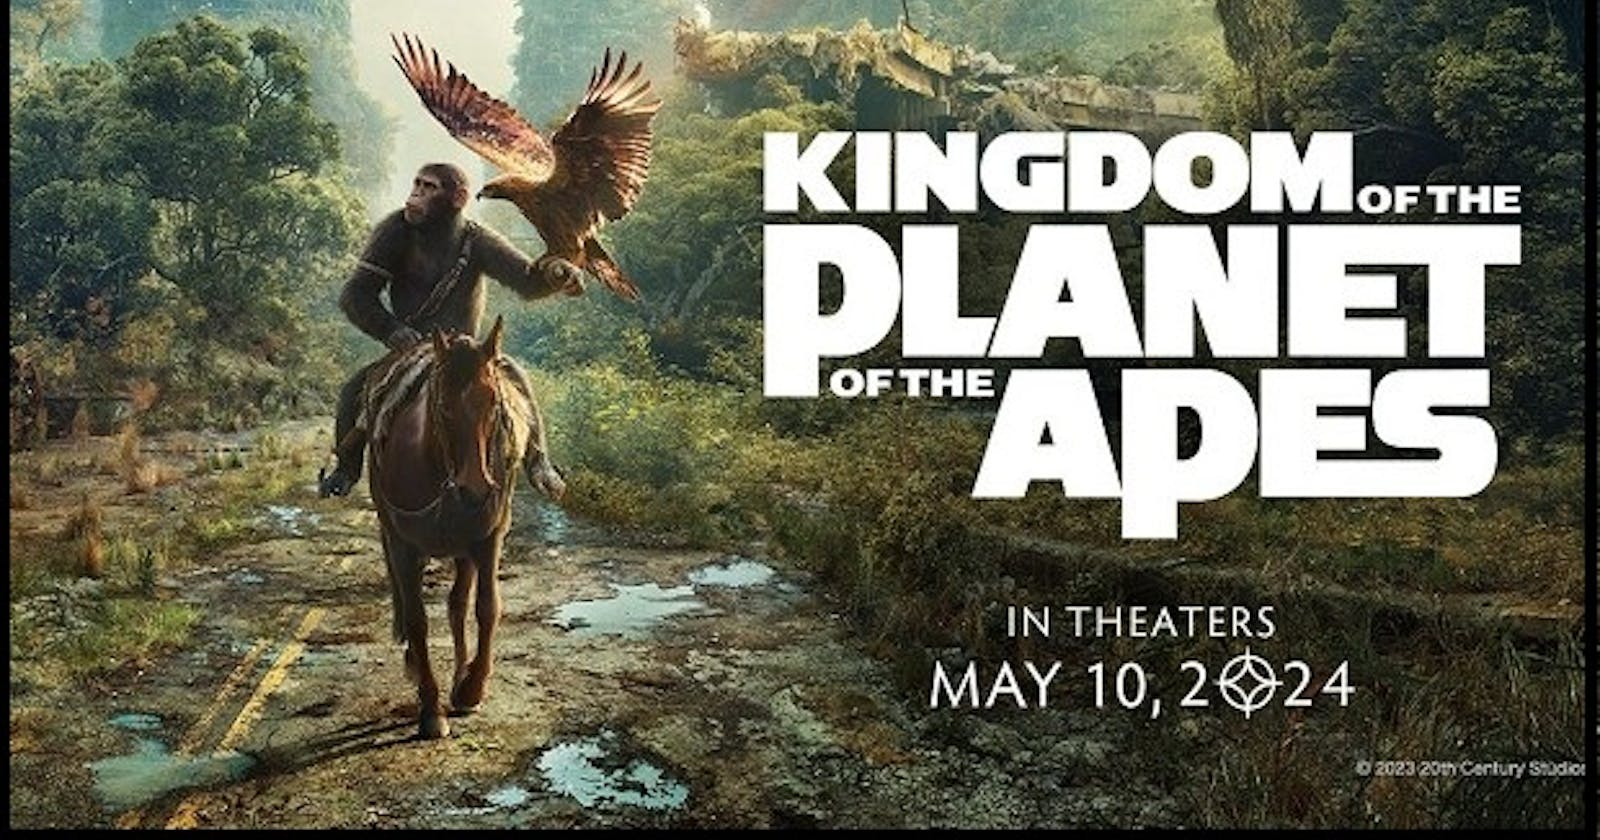 When Is Kingdom Of The Planet Of The Apes Coming Out? About Movie!!